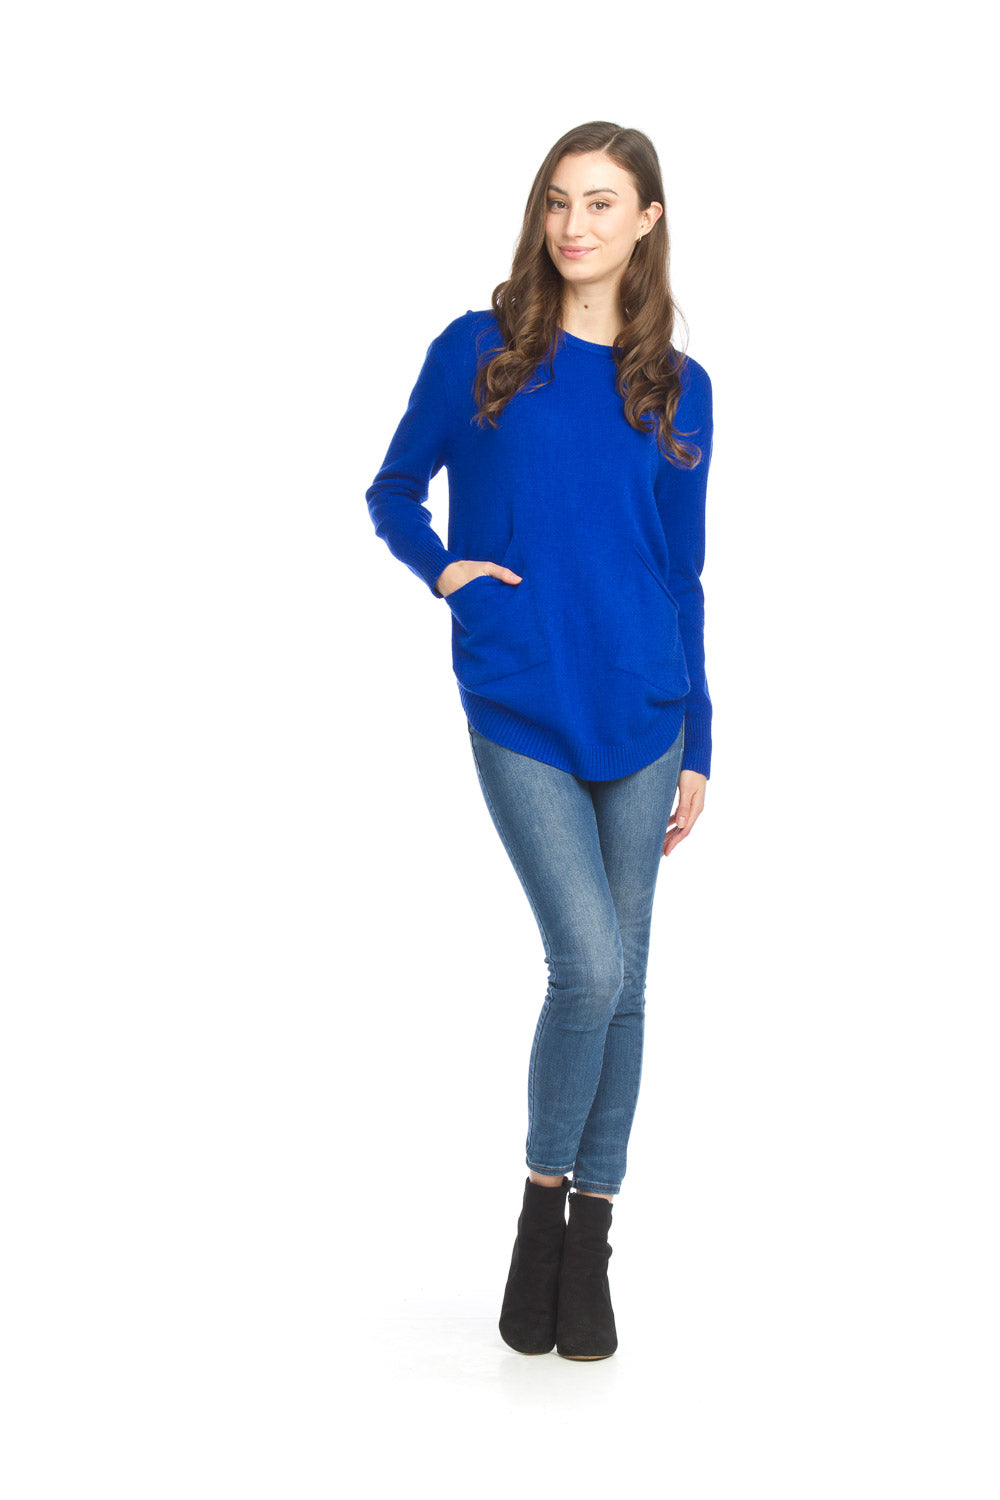 ST-06249 -Cobalt- Sweater Tunic with Rounded Hem and Pockets